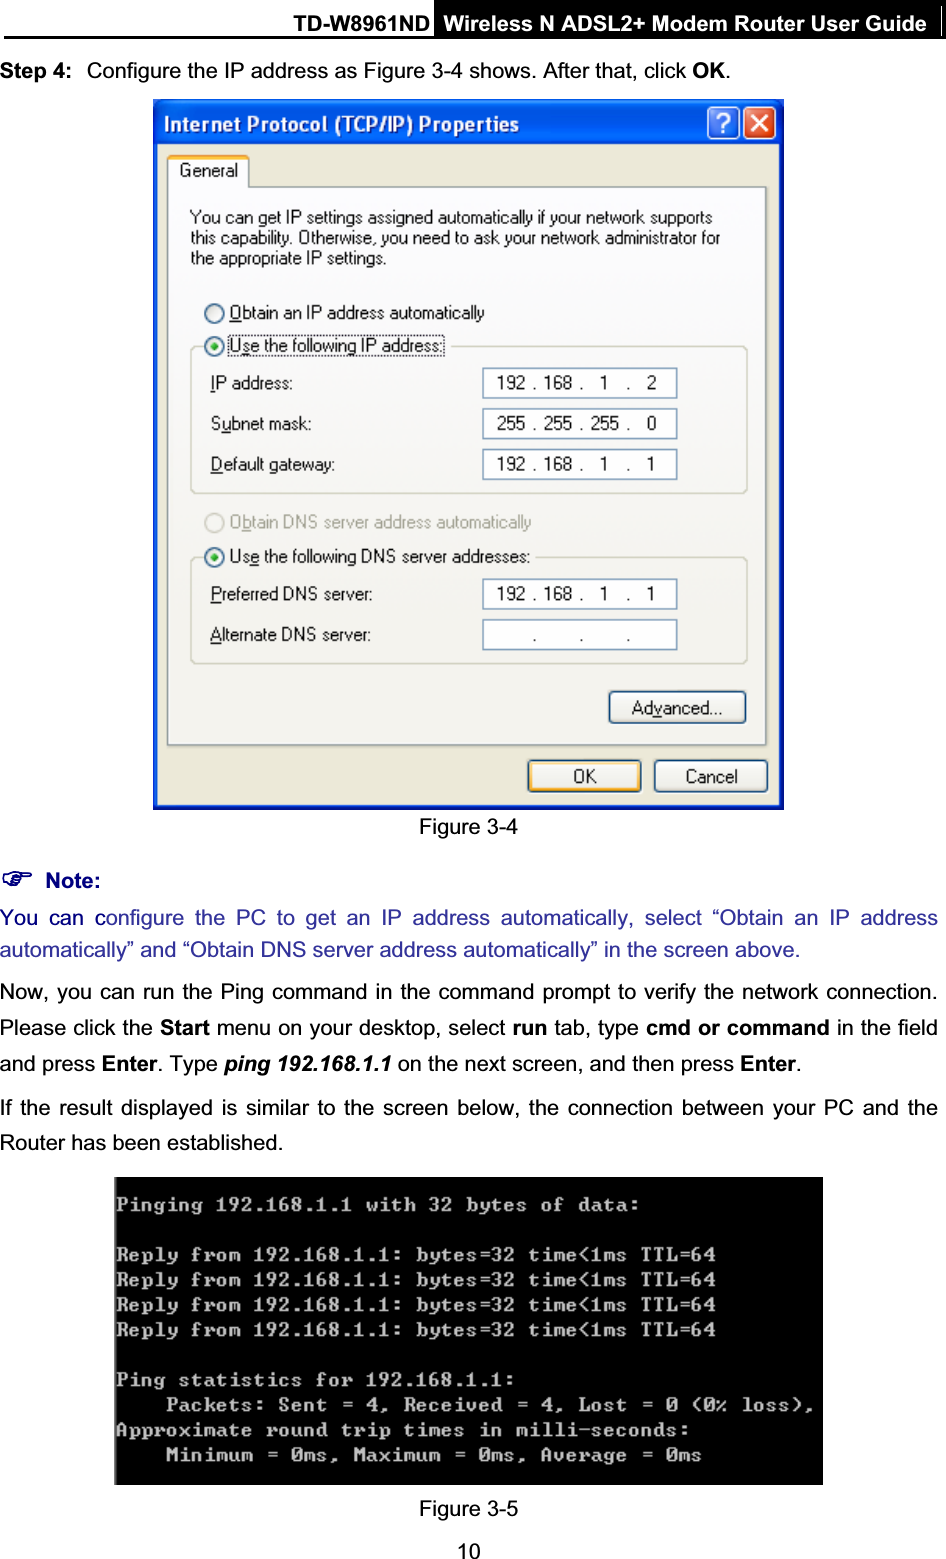 TD-W8961ND Wireless N ADSL2+ Modem Router User Guide10Step 4: Configure the IP address as Figure 3-4 shows. After that, click OK.Figure 3-4 )Note:You can configure the PC to get an IP address automatically, select “Obtain an IP address automatically” and “Obtain DNS server address automatically” in the screen above.   Now, you can run the Ping command in the command prompt to verify the network connection. Please click the Start menu on your desktop, select run tab, type cmd or command in the field and press Enter. Type ping 192.168.1.1 on the next screen, and then press Enter.If the result displayed is similar to the screen below, the connection between your PC and the Router has been established. Figure 3-5 